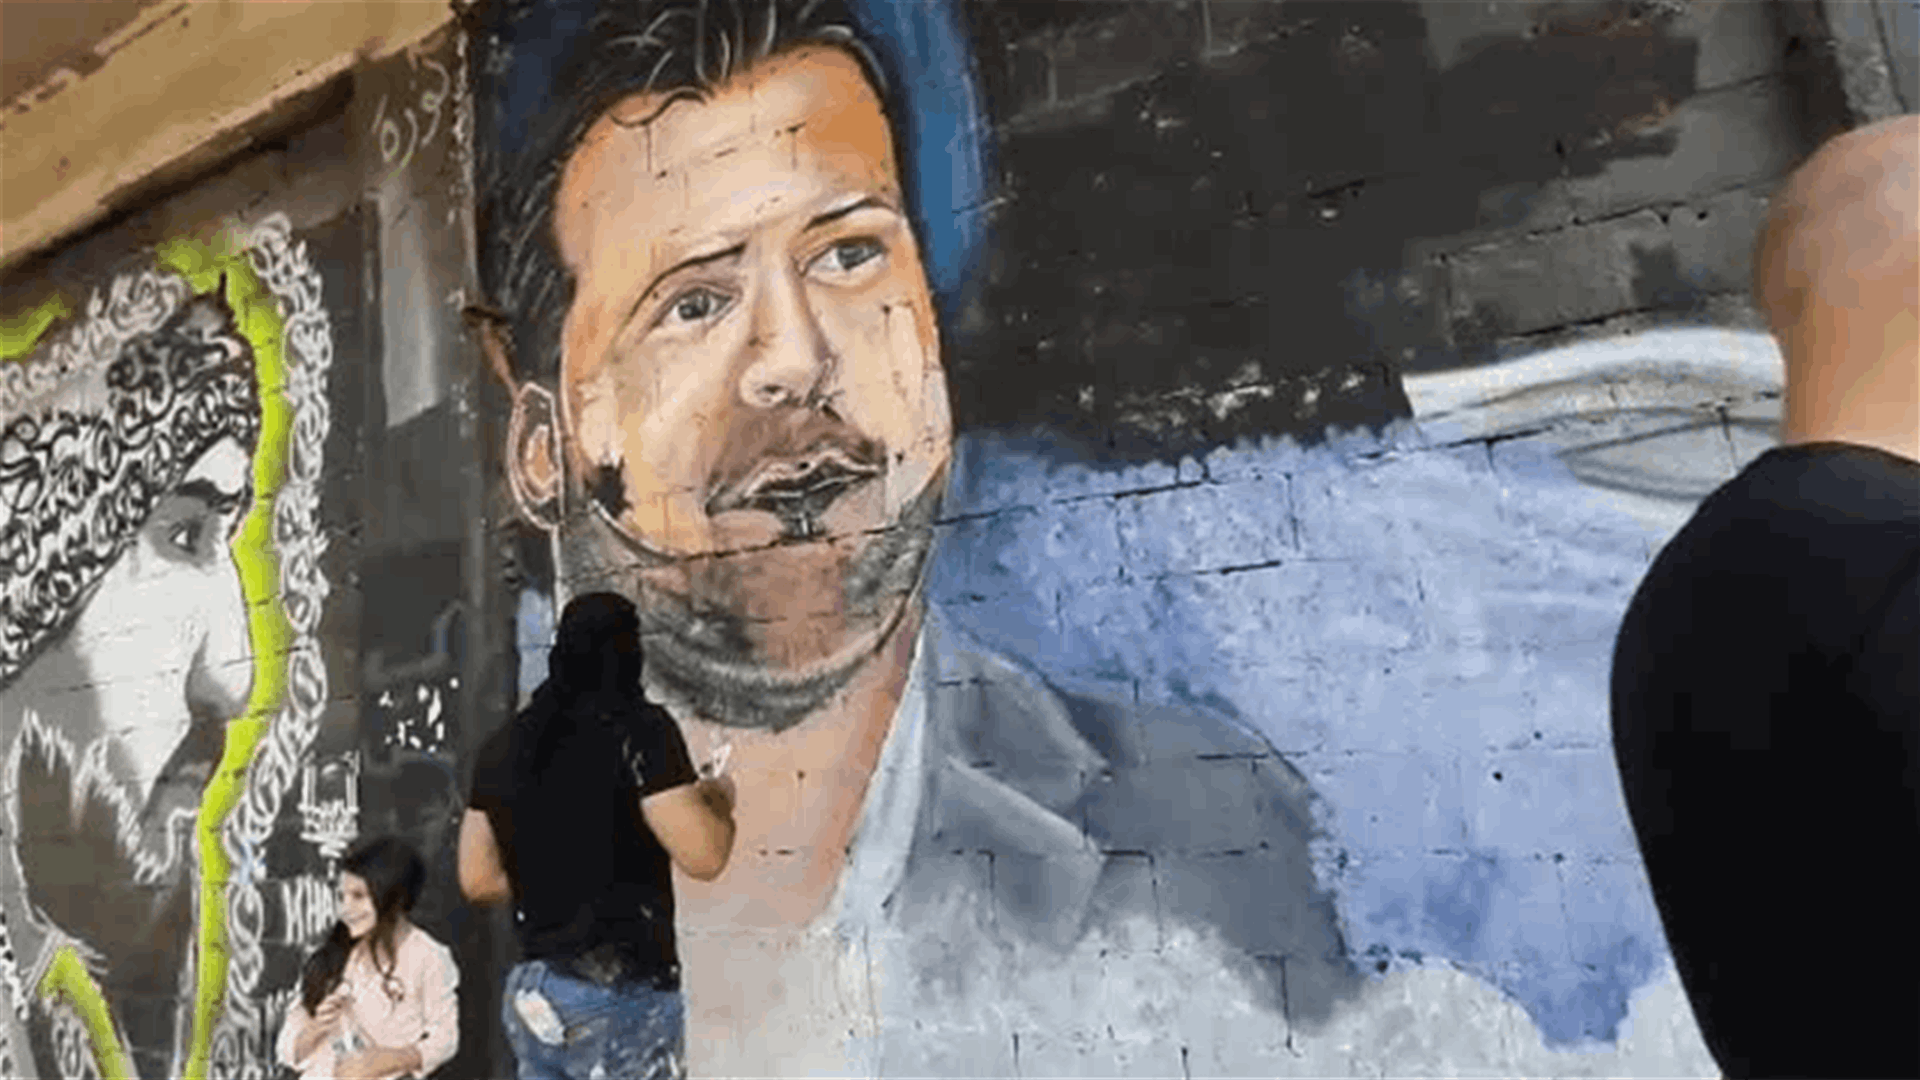 Tripoli honors Alaa Abou Fakher with portrait mural in al-Nour Square (Video)